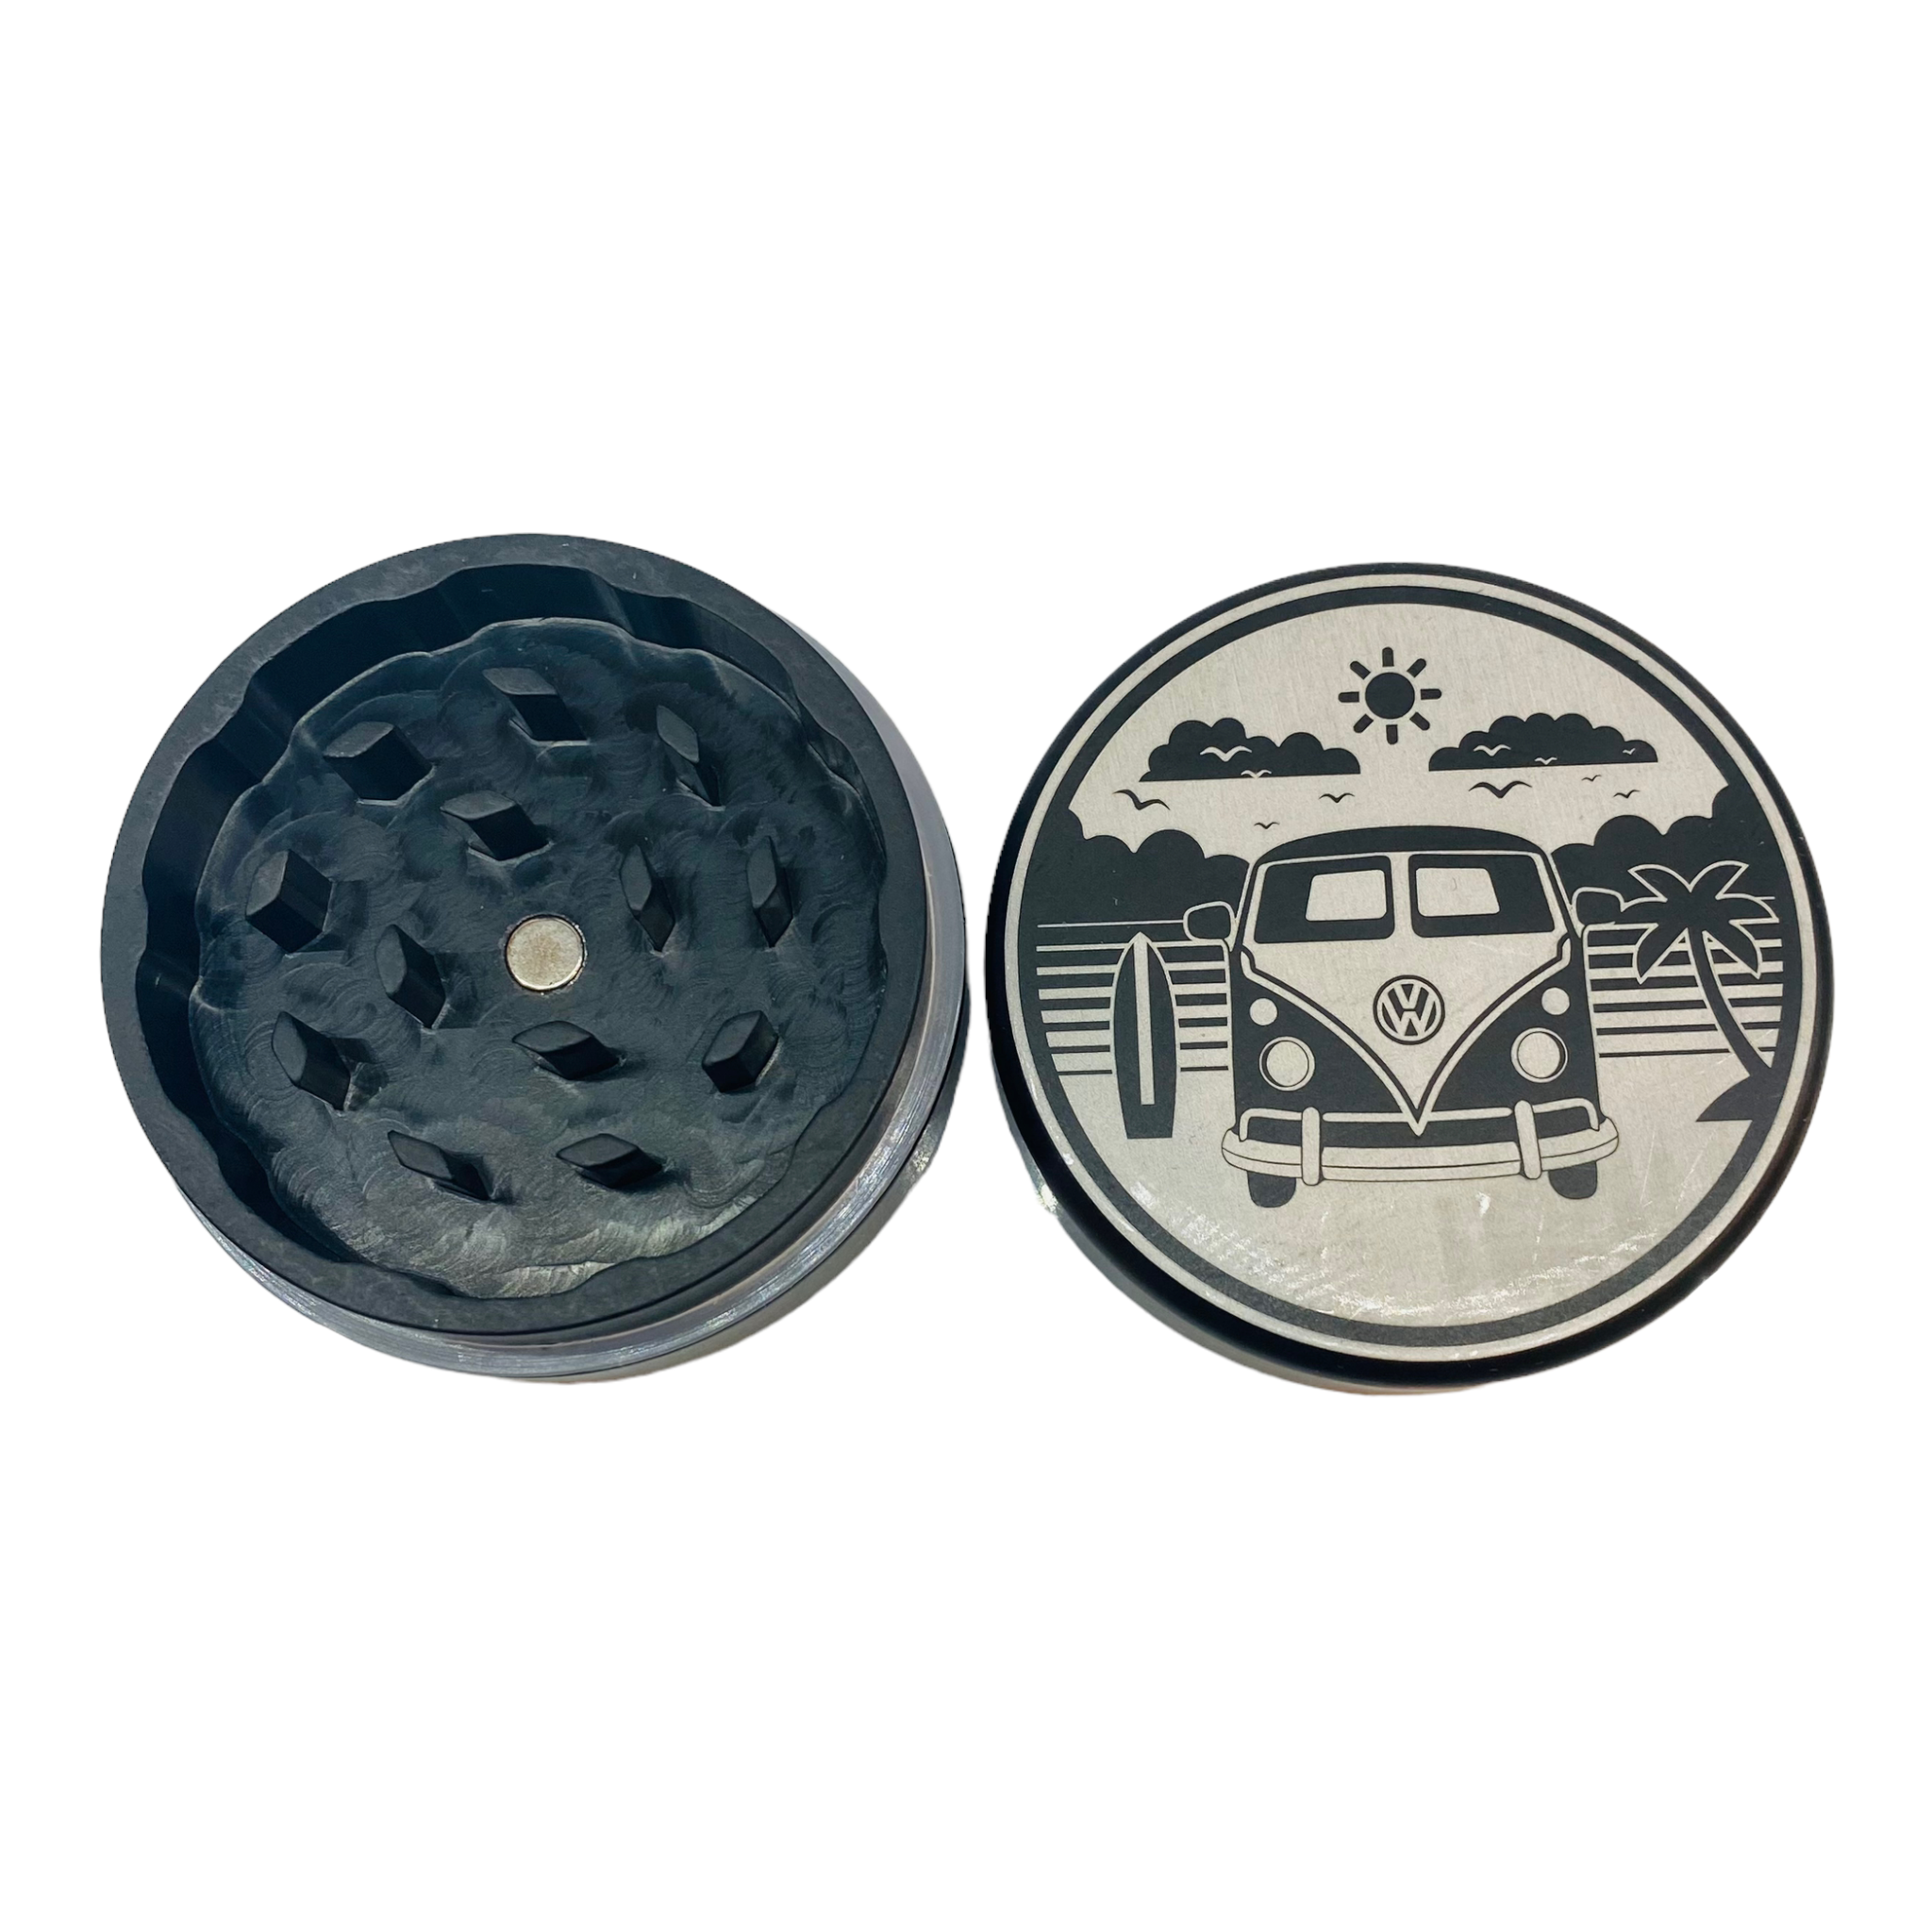 Tahoe Grinders - Gold Anodized Aluminum Large Two Piece Herb Grinder W